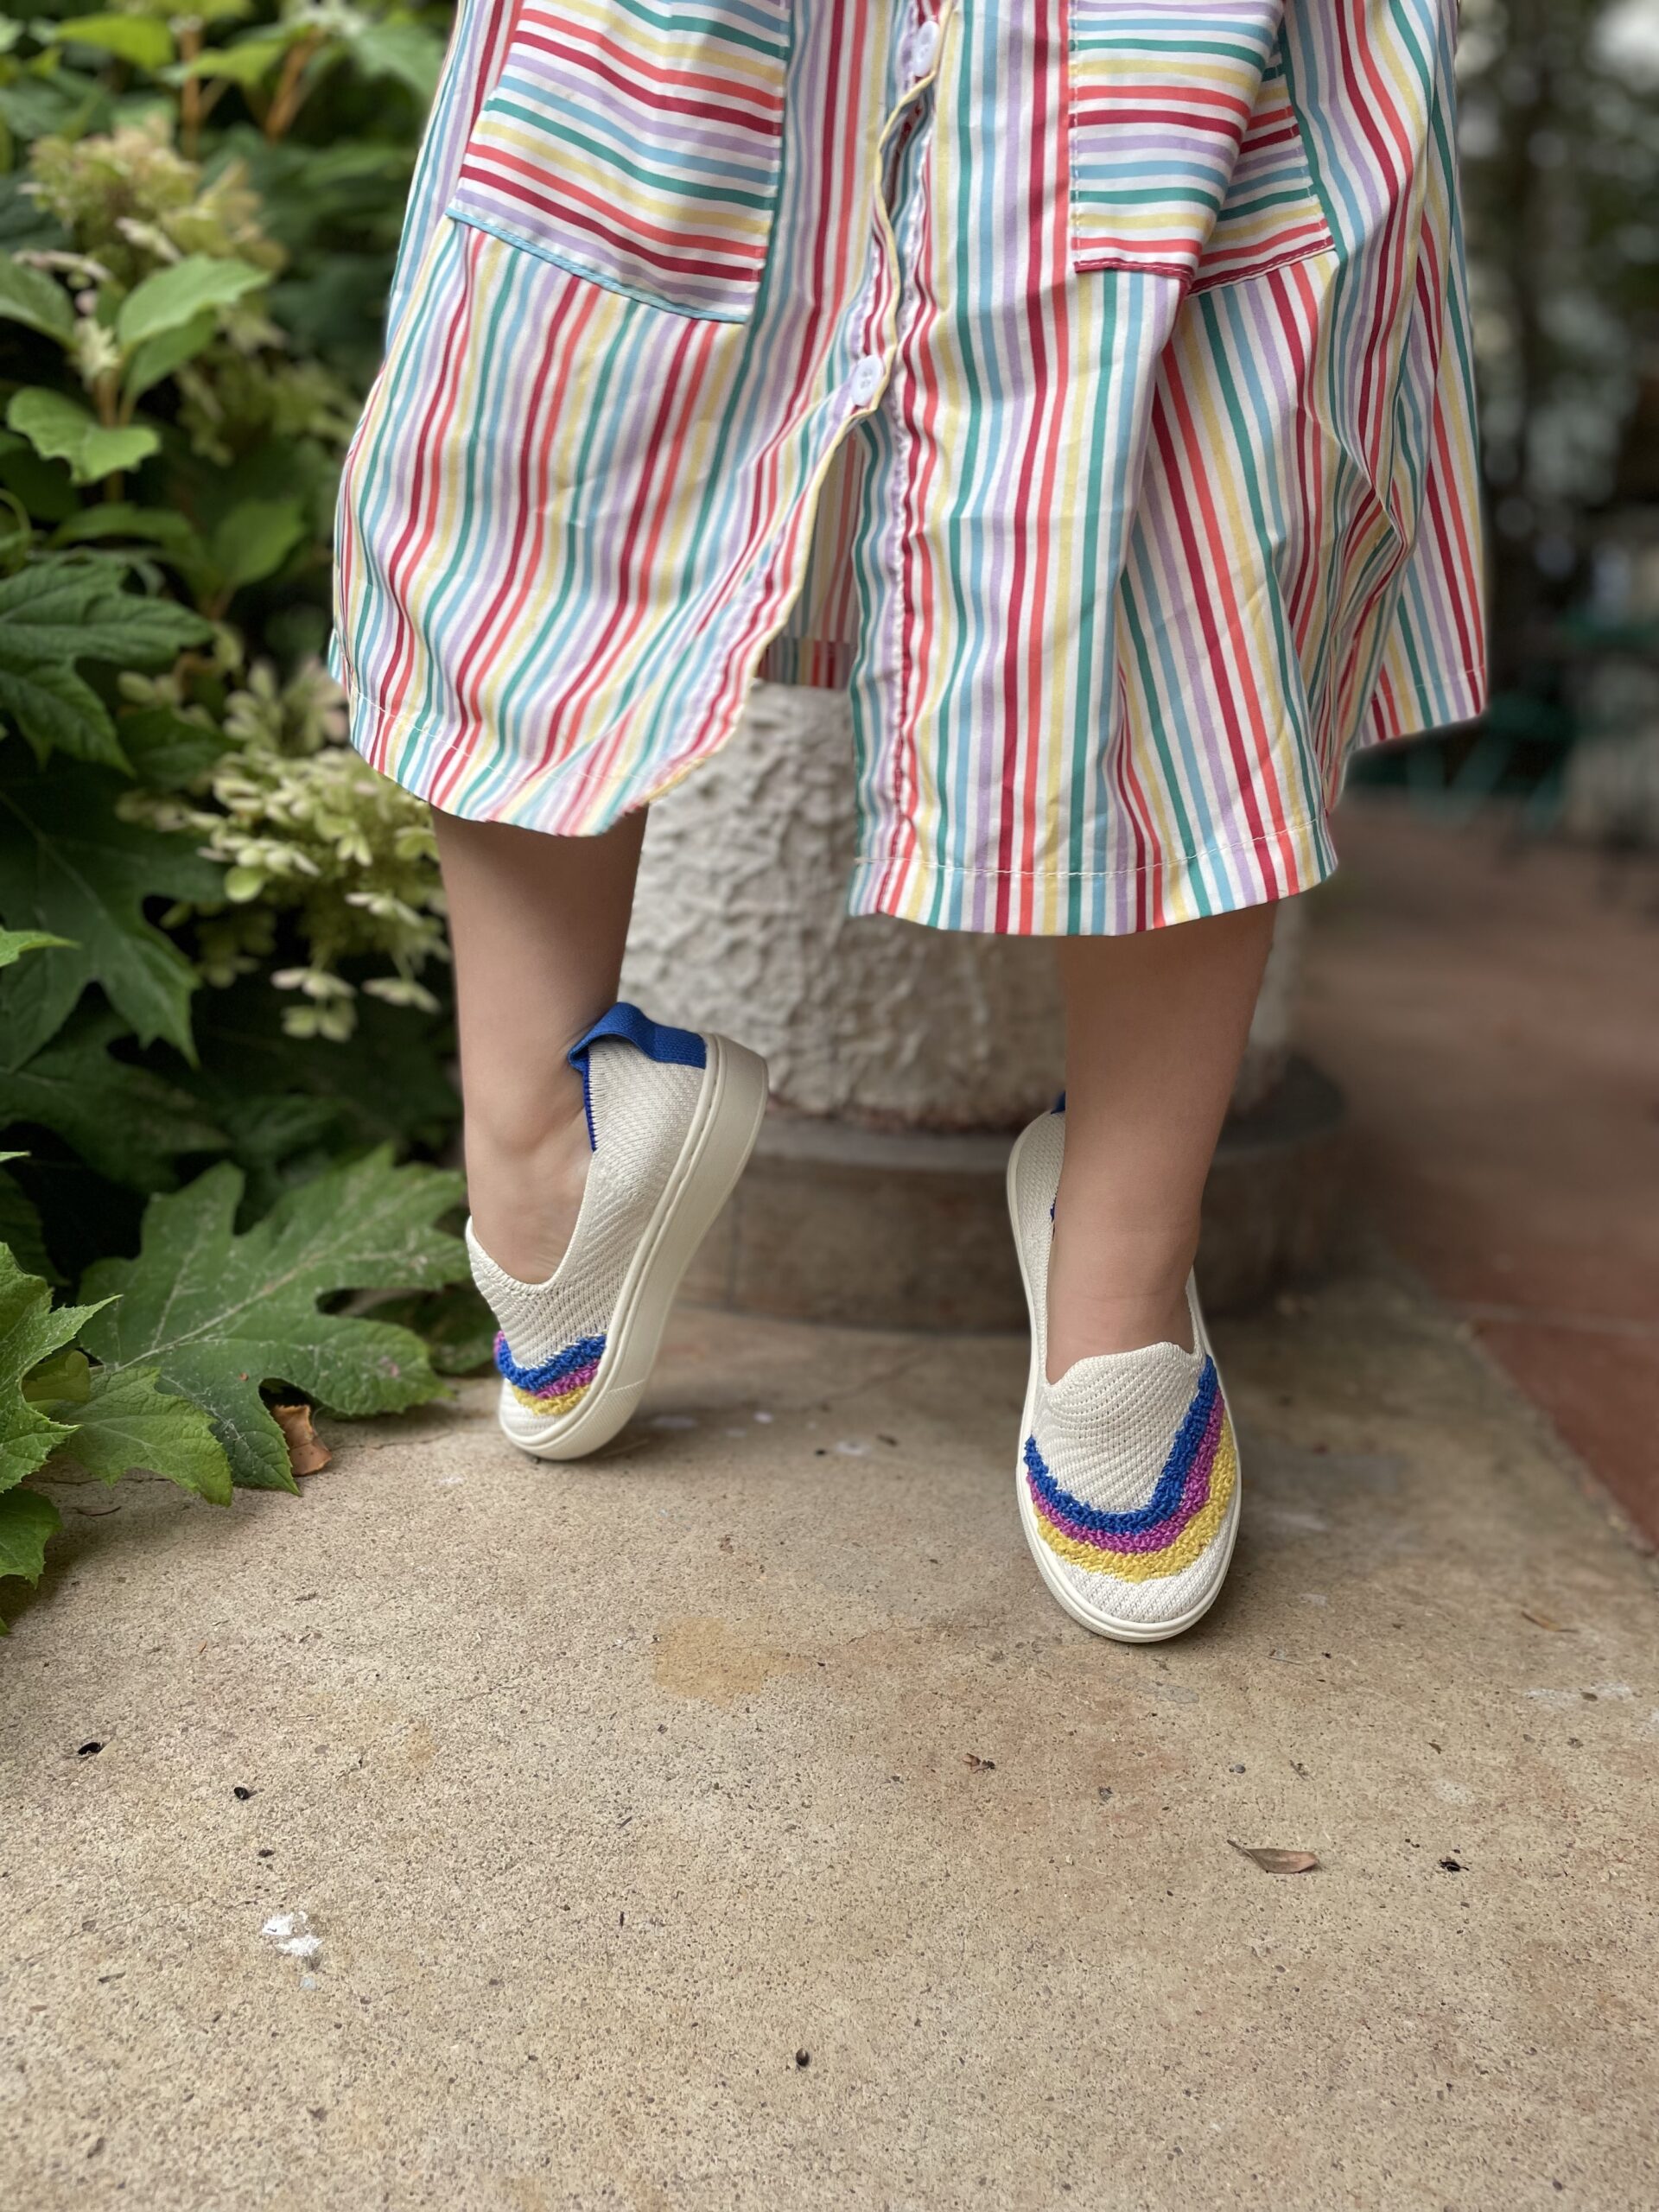 A little girl's feet on tippy toes wearing Rothys.